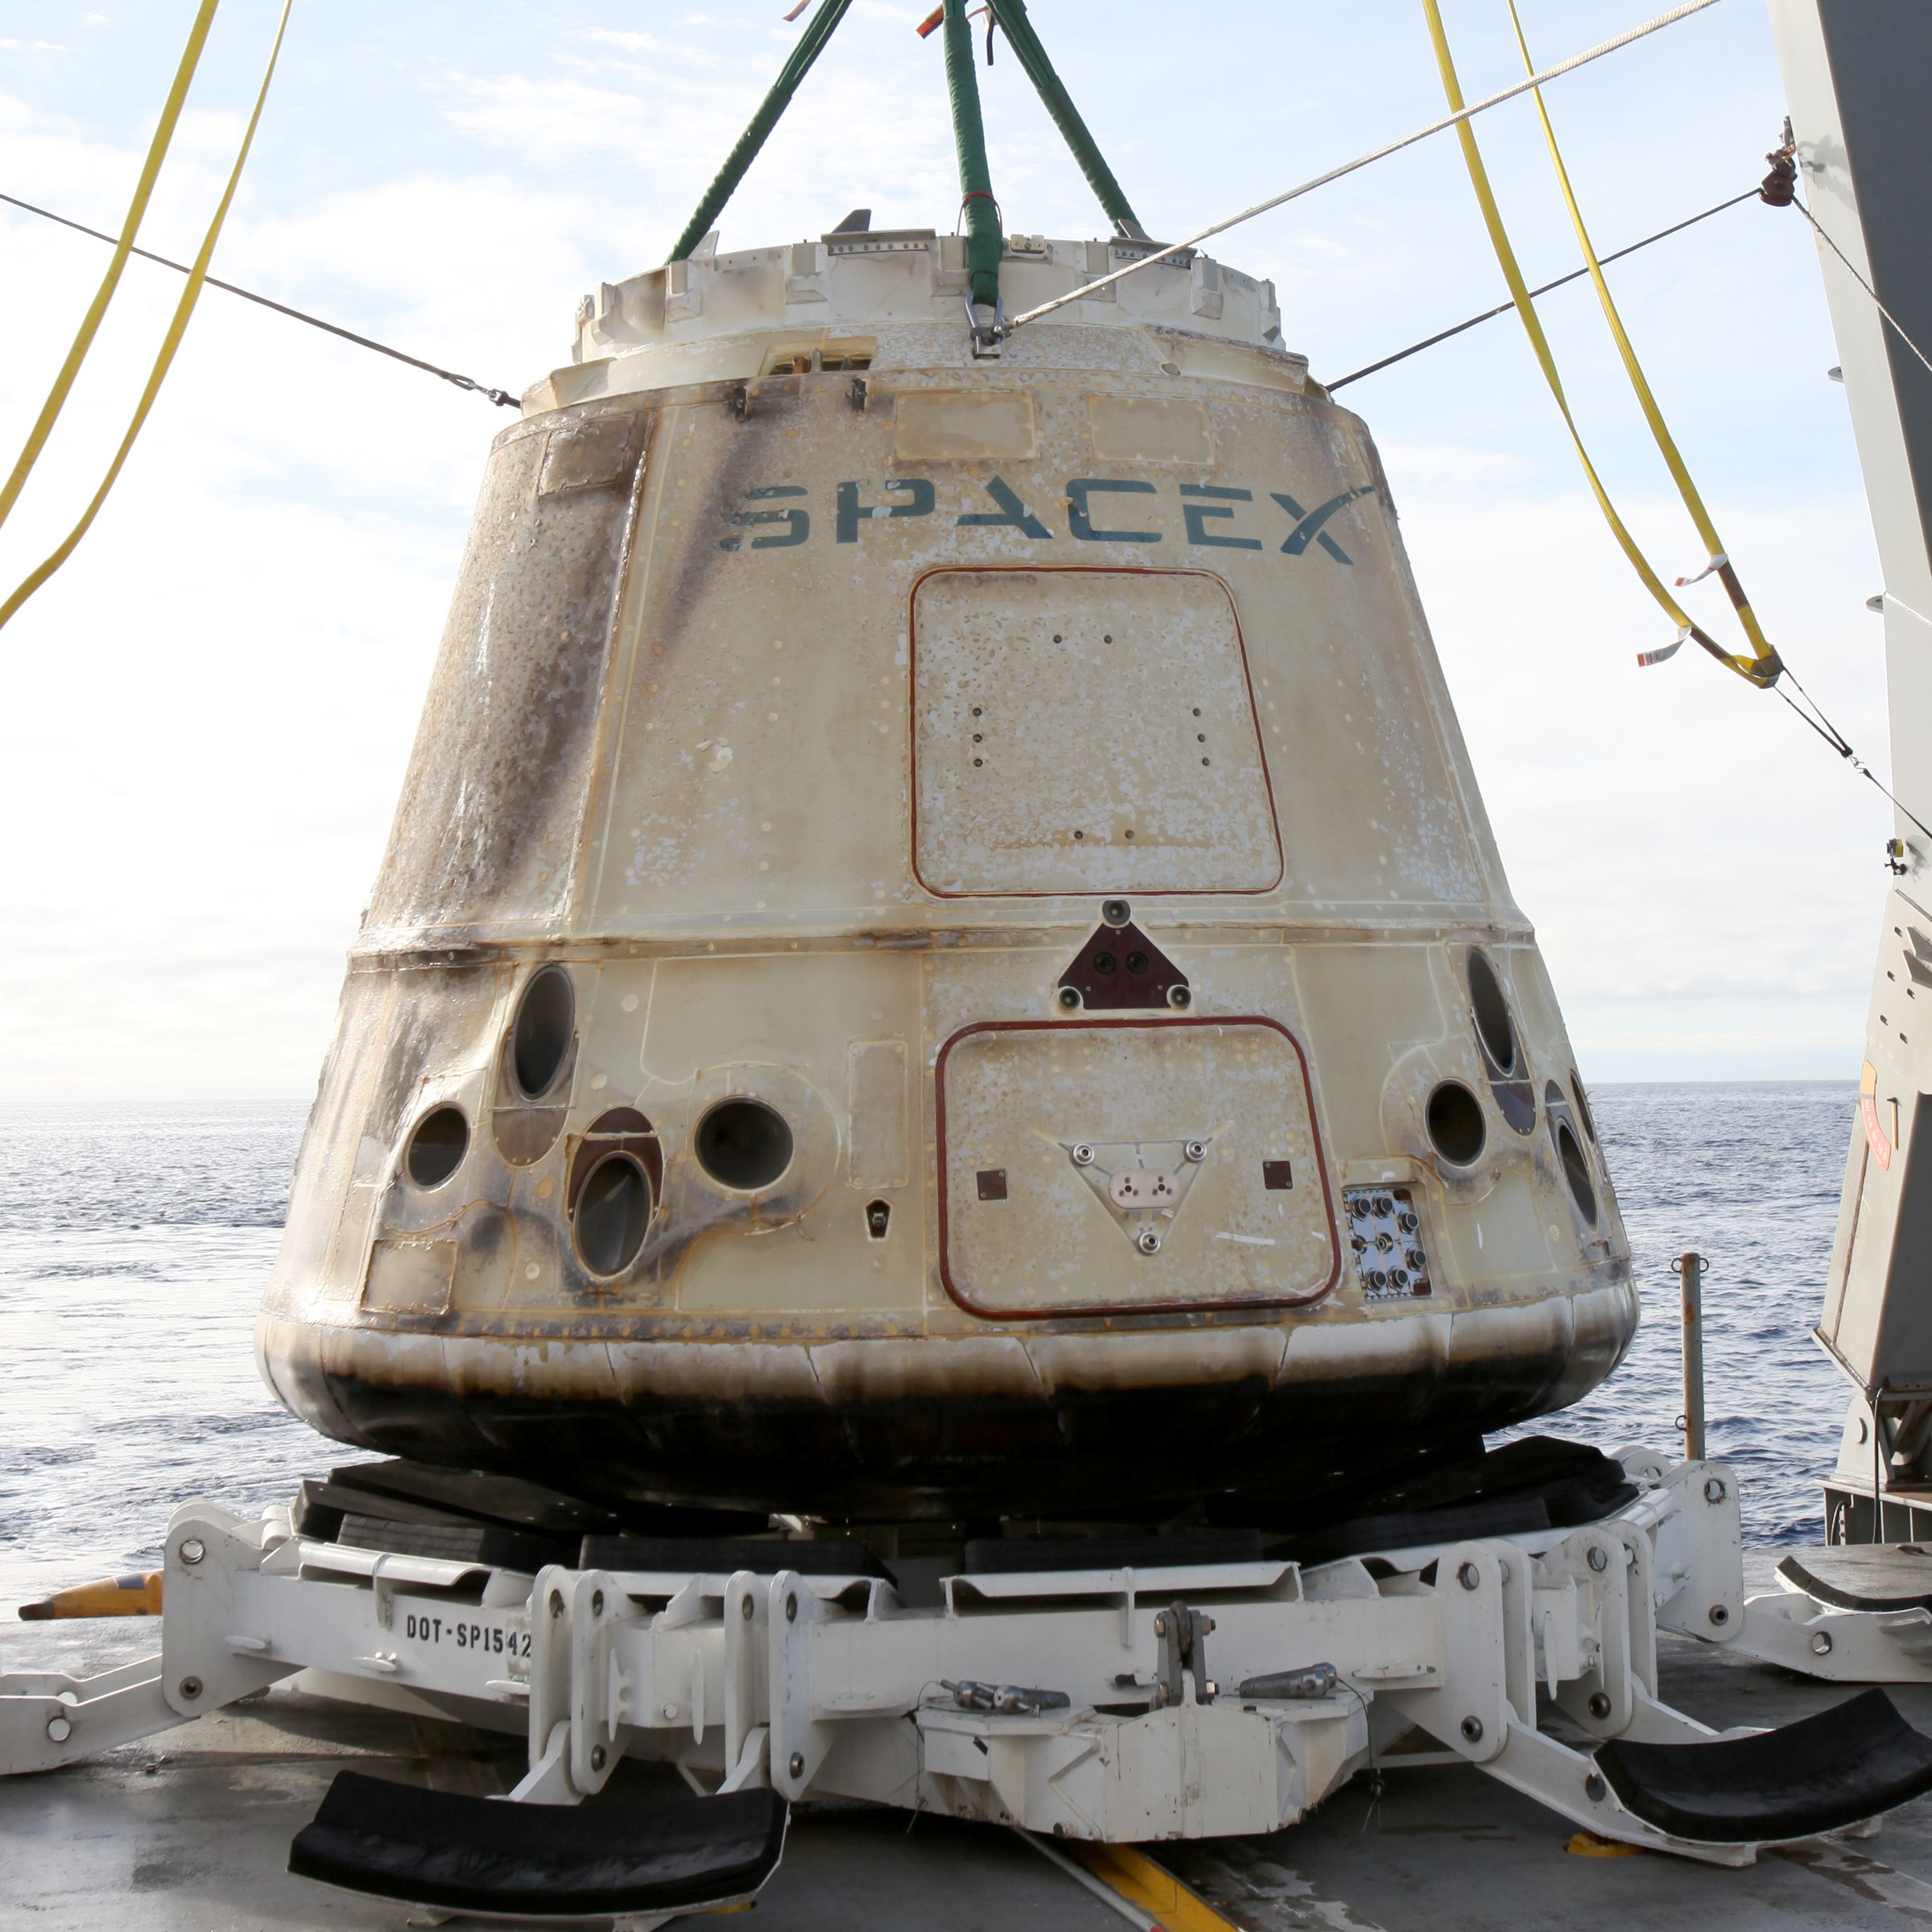 SpaceX’s logo on display on a Dragon capsule the company launched for NASA.